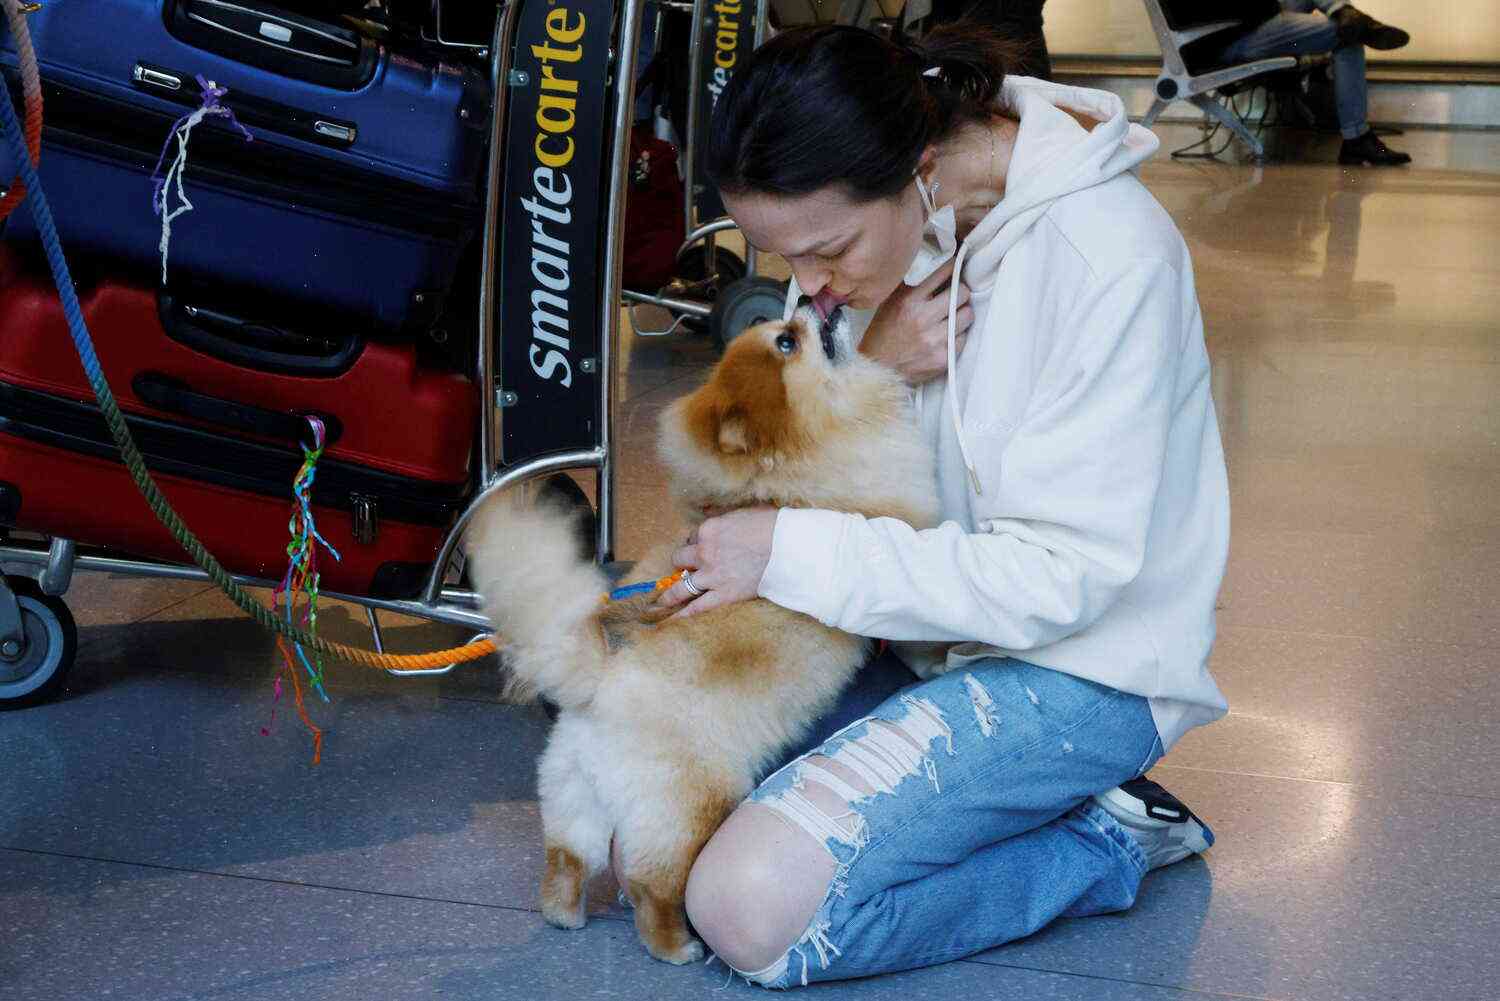 TSA ends restrictions that may have stranded passengers with pets on Delta, American flights